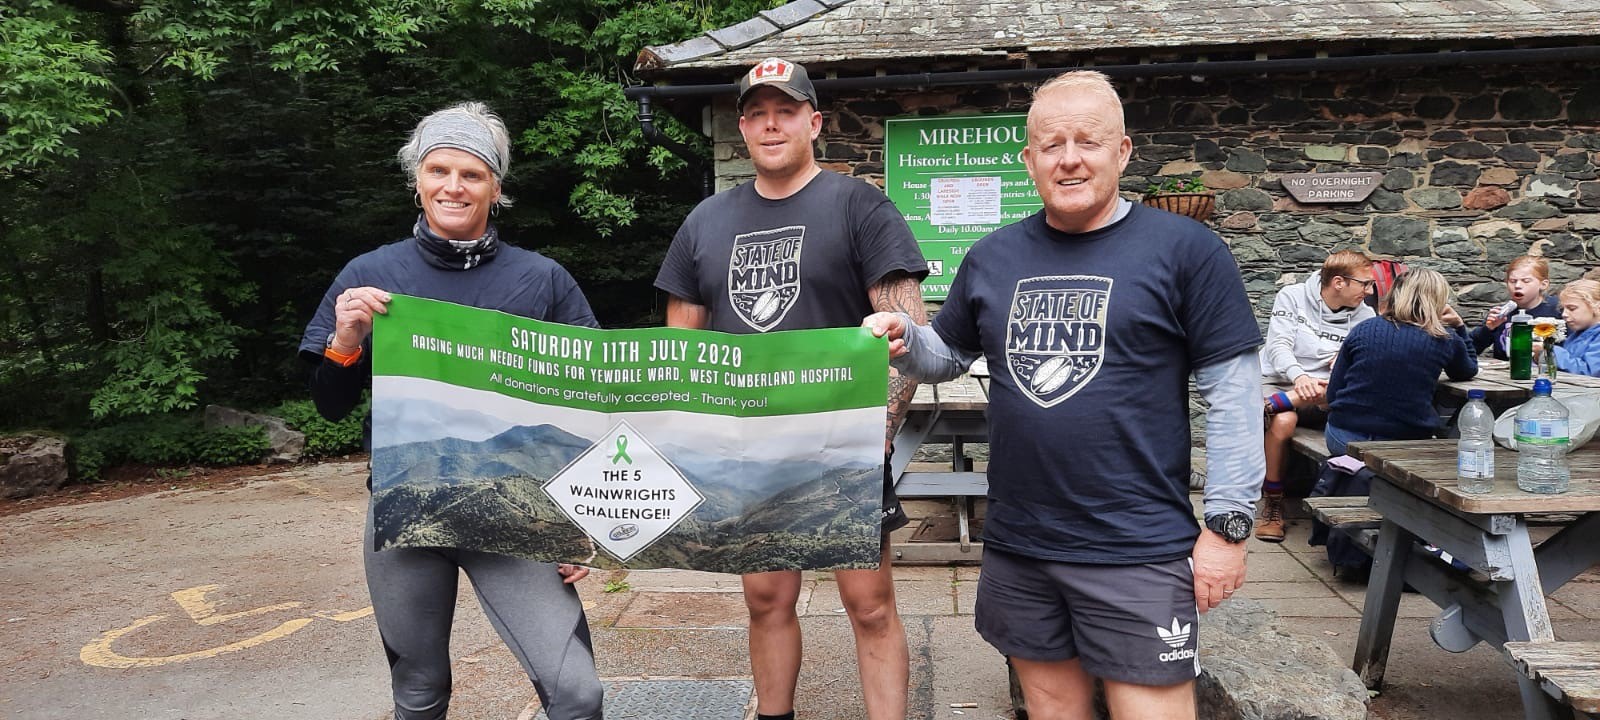 6 men in rugby shirts bearing the State of Mind charity's logo stand together in a cap park, holding a banner for the 5 Wainwrights challenge